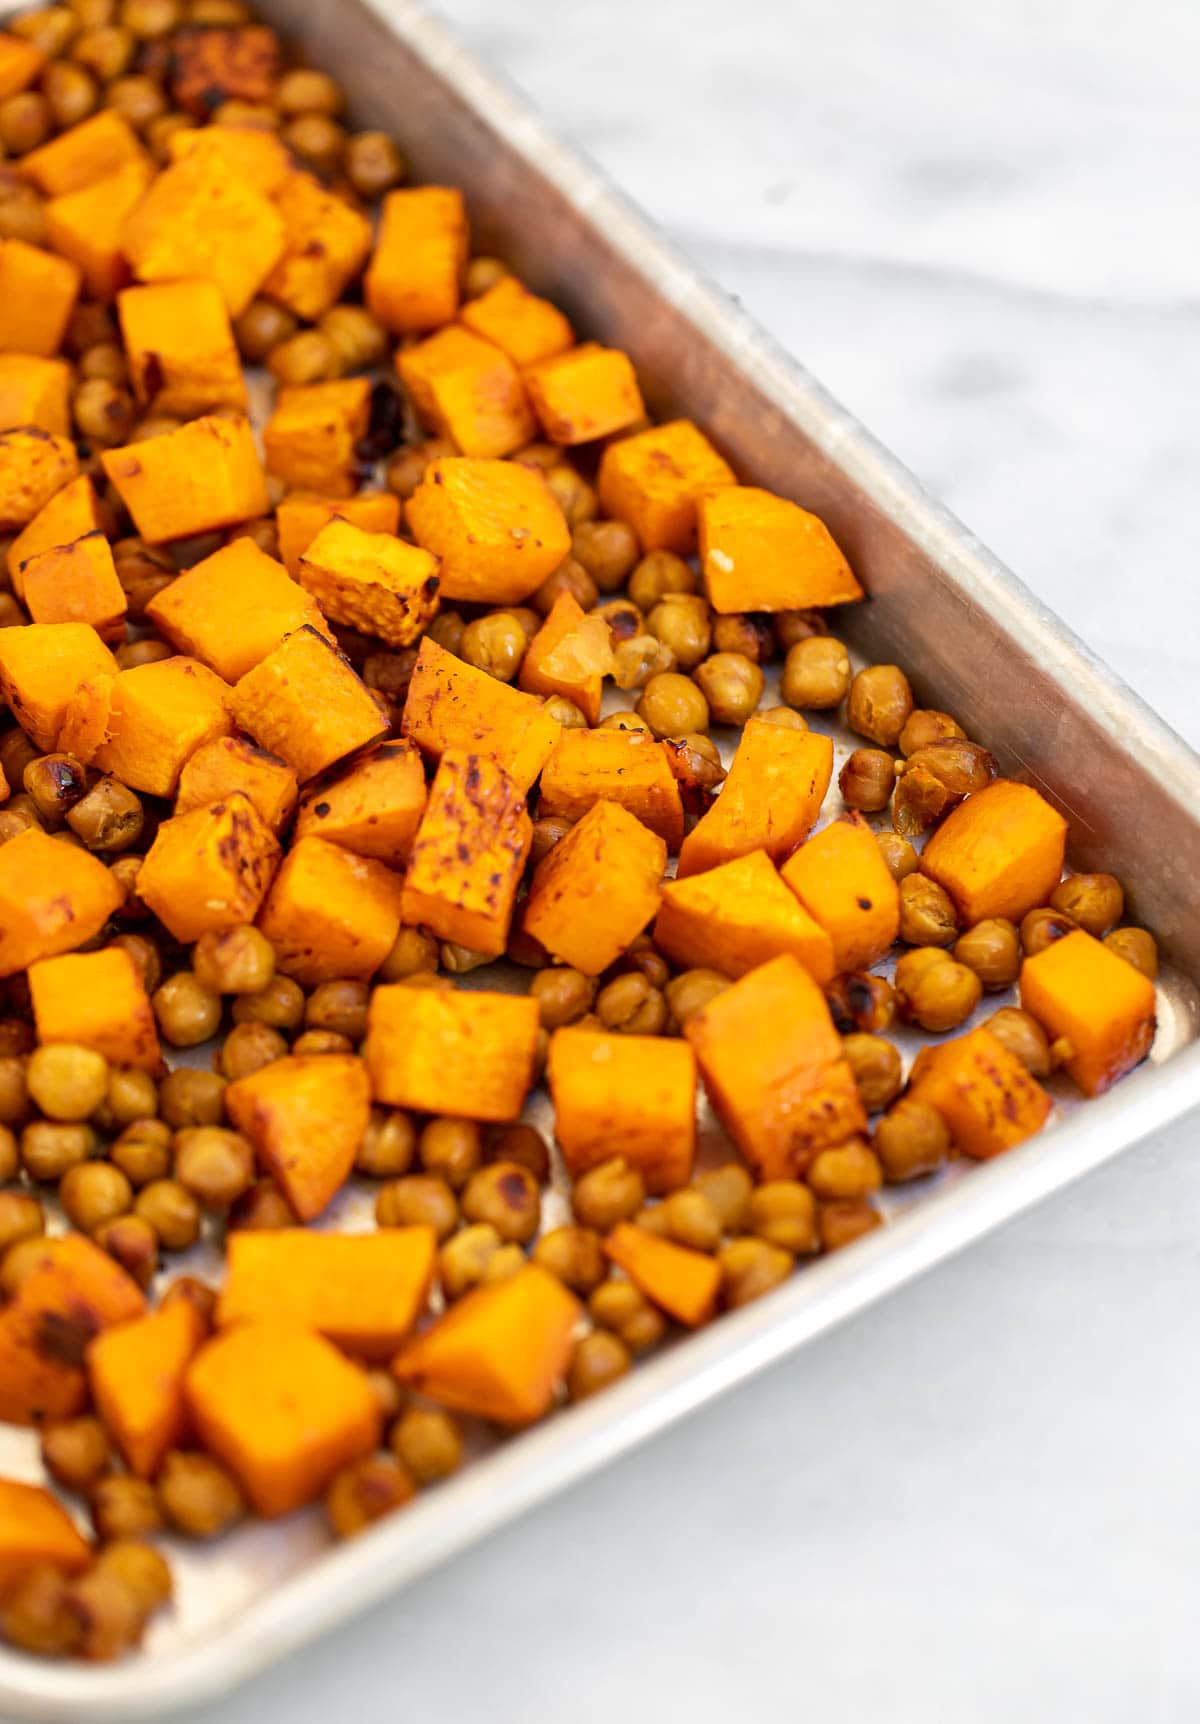 Roasted sweet potatoes and chickpeas on a baking tray.